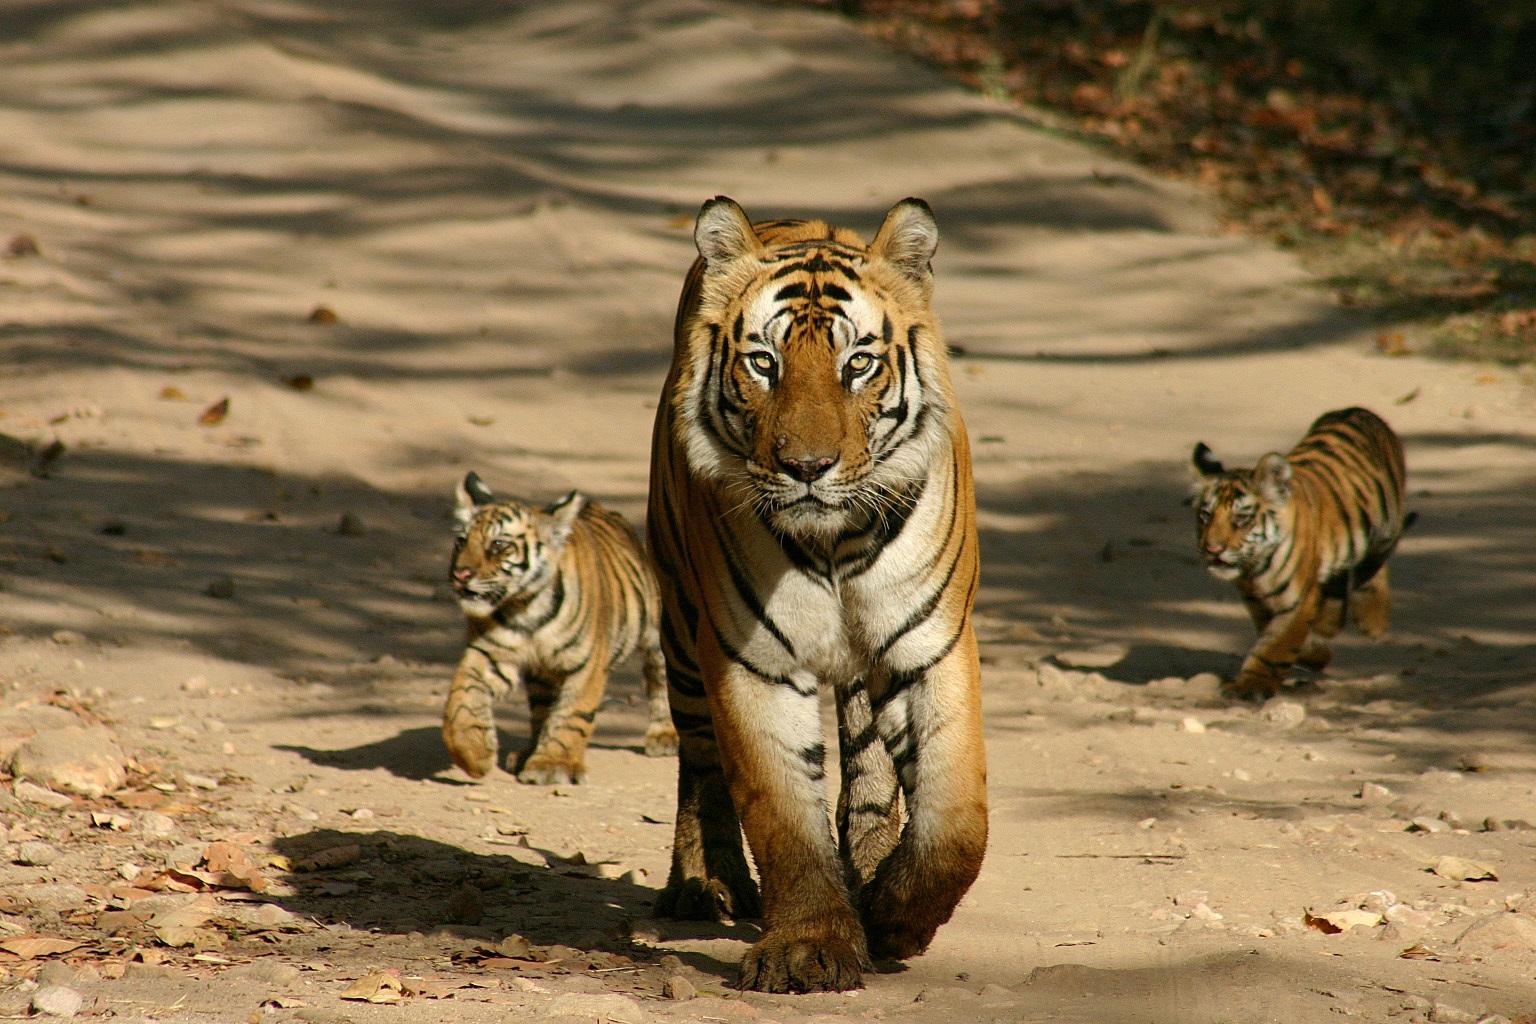 See tigers on a Go Slow trip to India's Satpura National Park